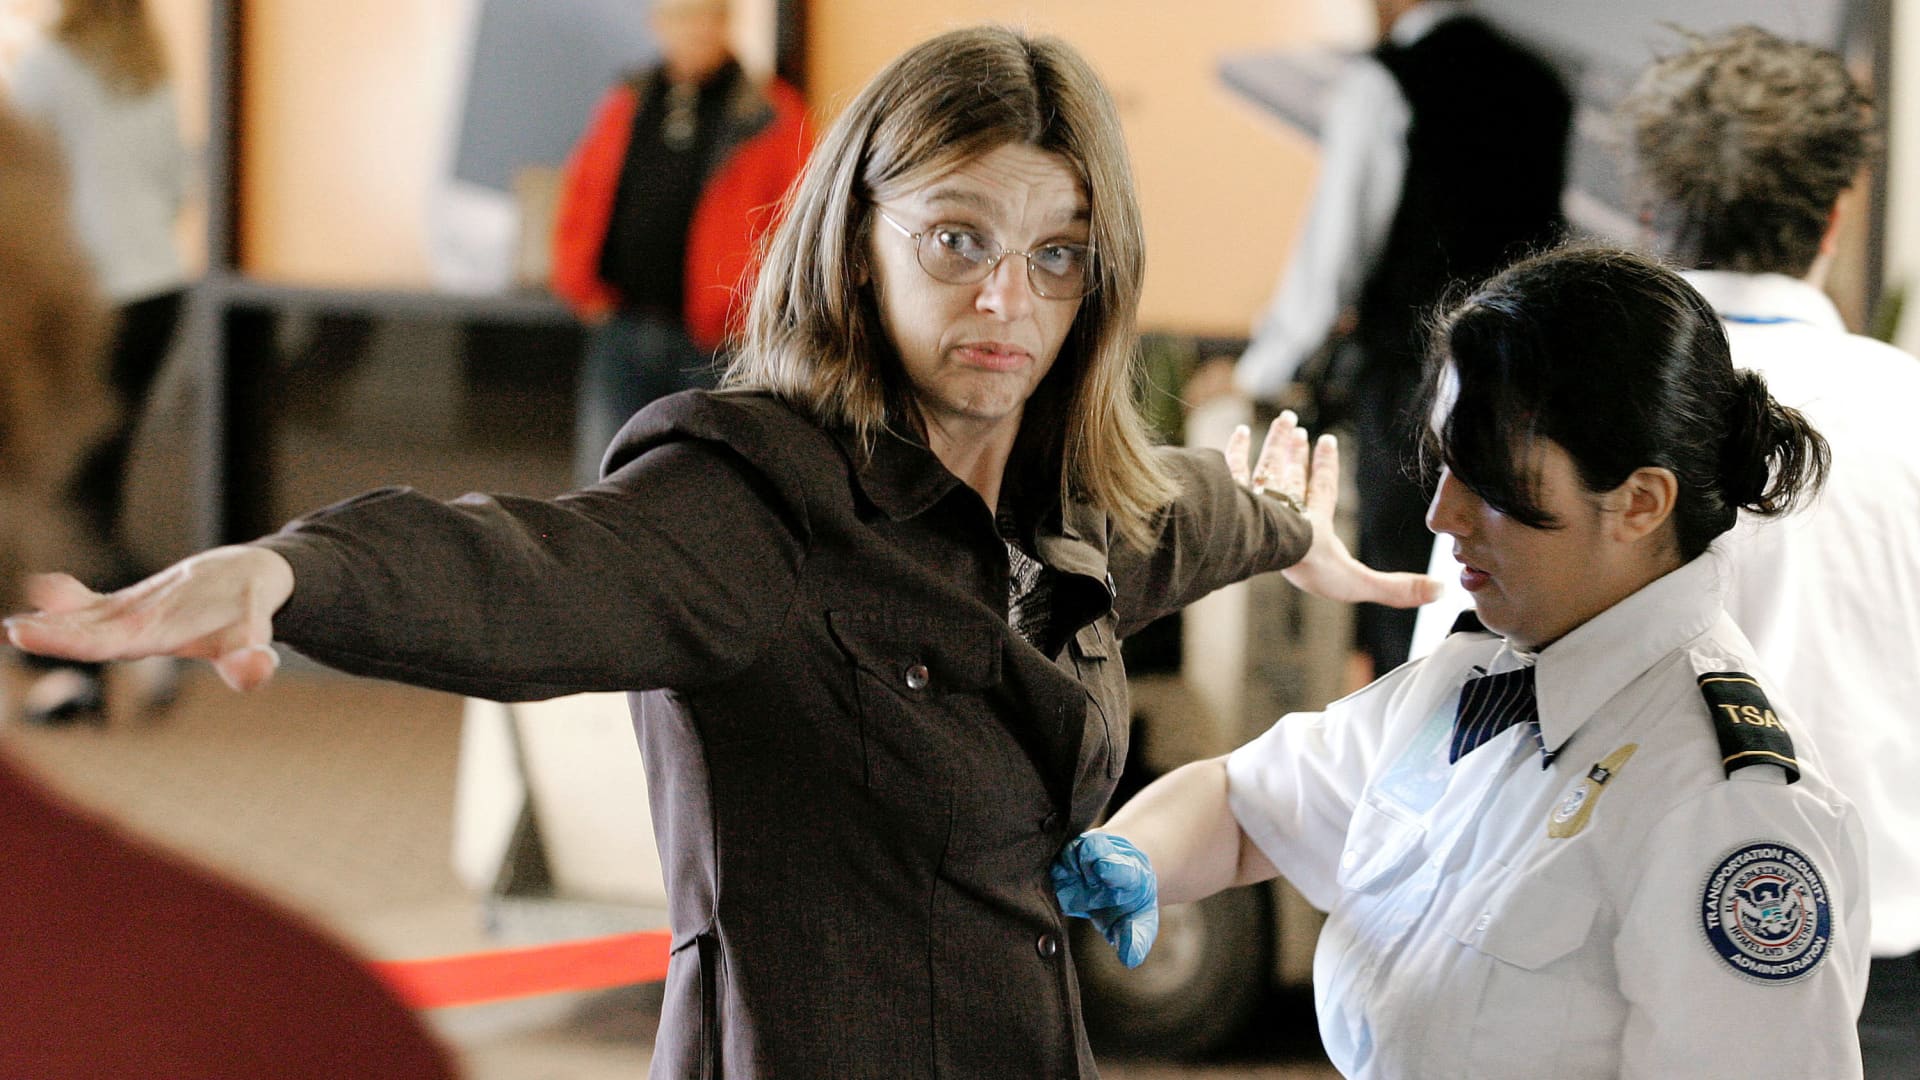 A Transportation Security Administration agent performs a pat-down check on an airline passenger at a security checkpoint in terminal four at Phoenix Sky Harbor International Airport December 10, 2004 in Phoenix, Arizona.